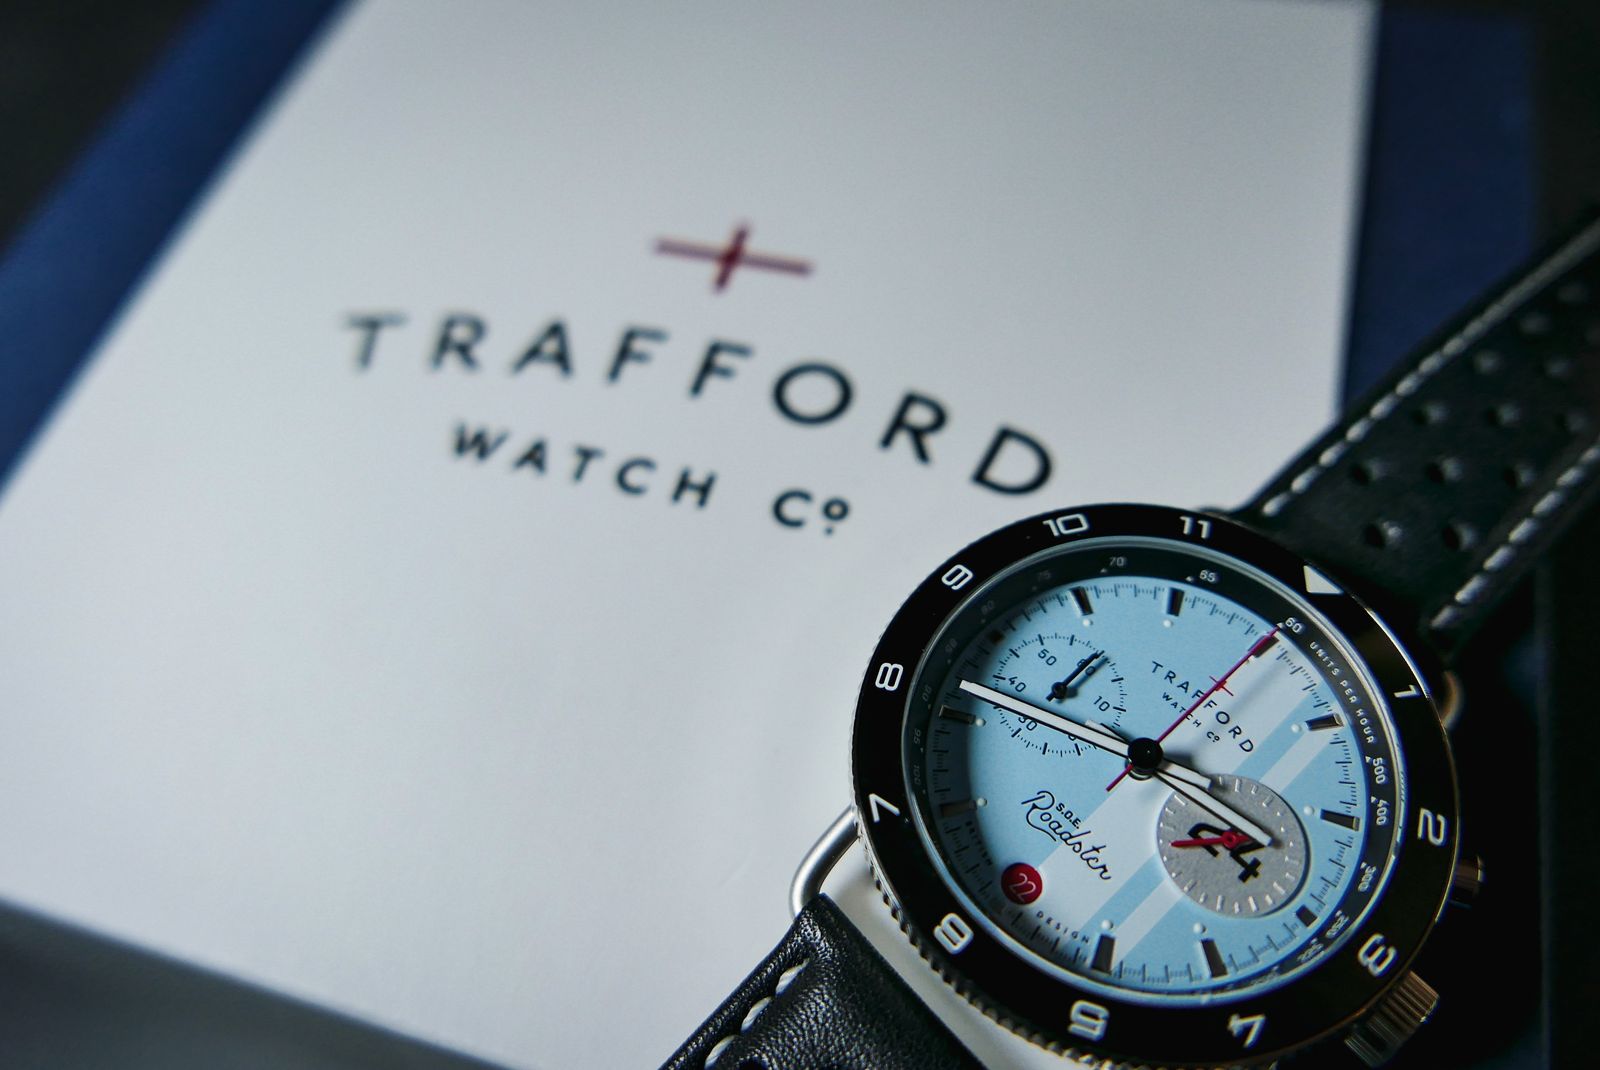 Trafford Watch Co S.O.E. Roadster Watch | The Coolector